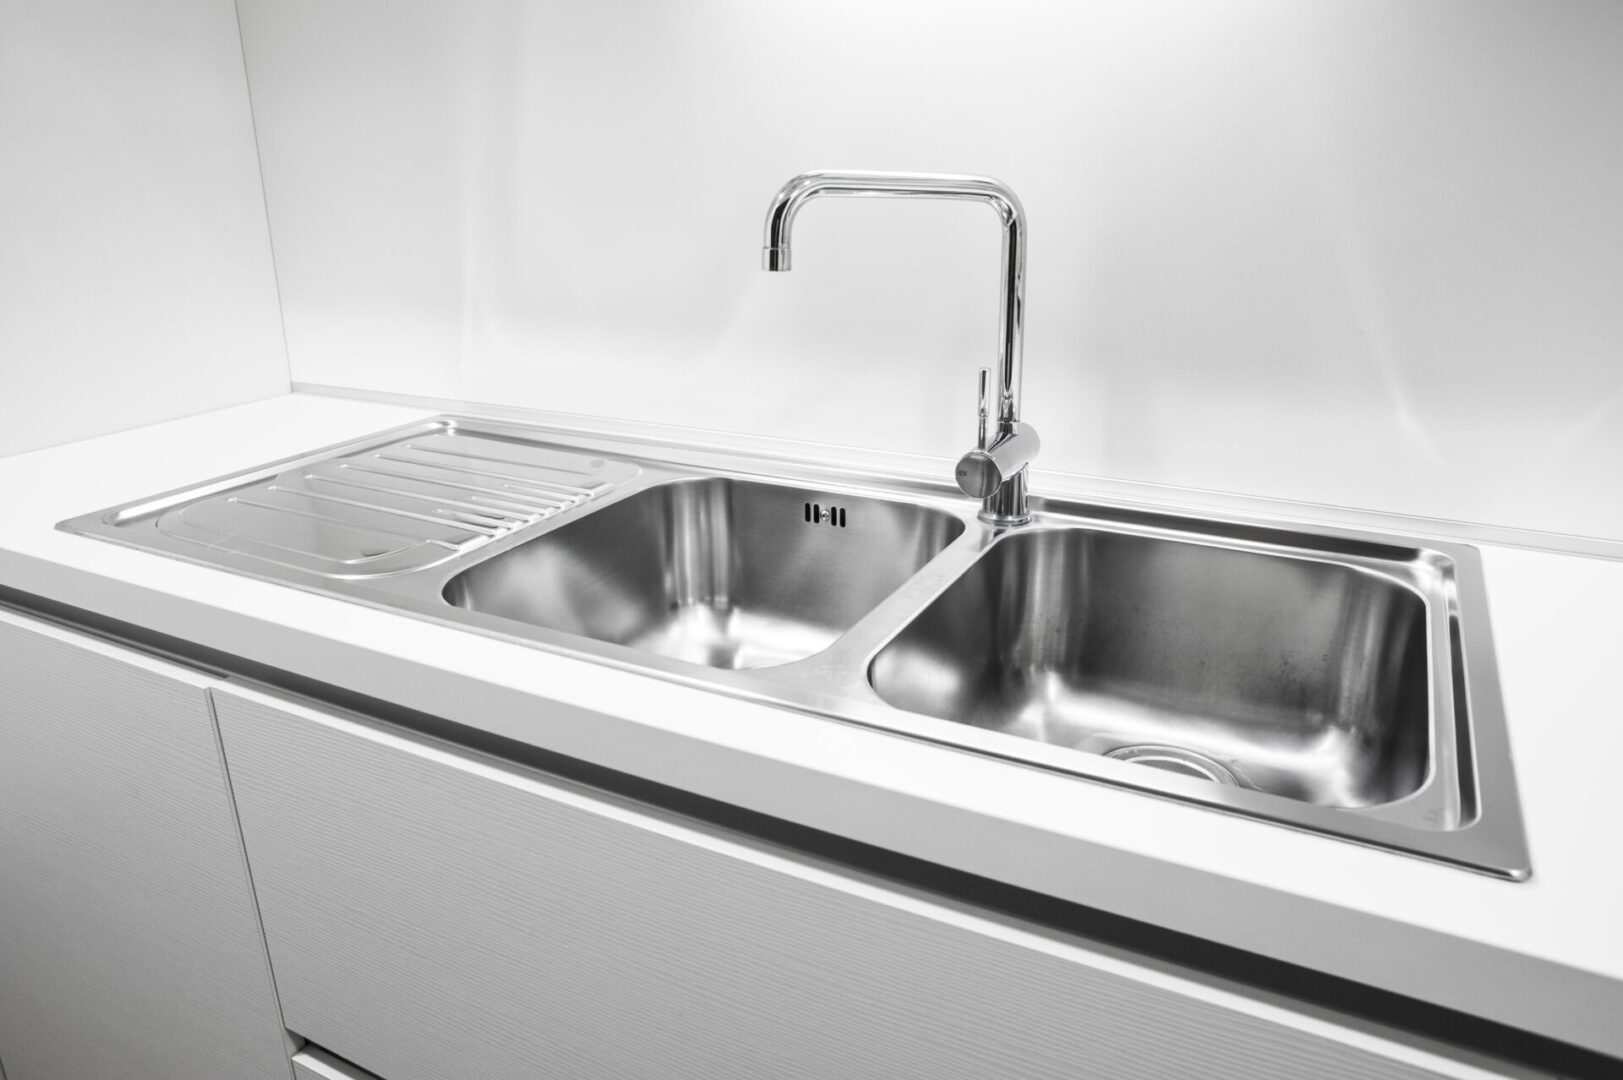 A close up of the sink in a kitchen